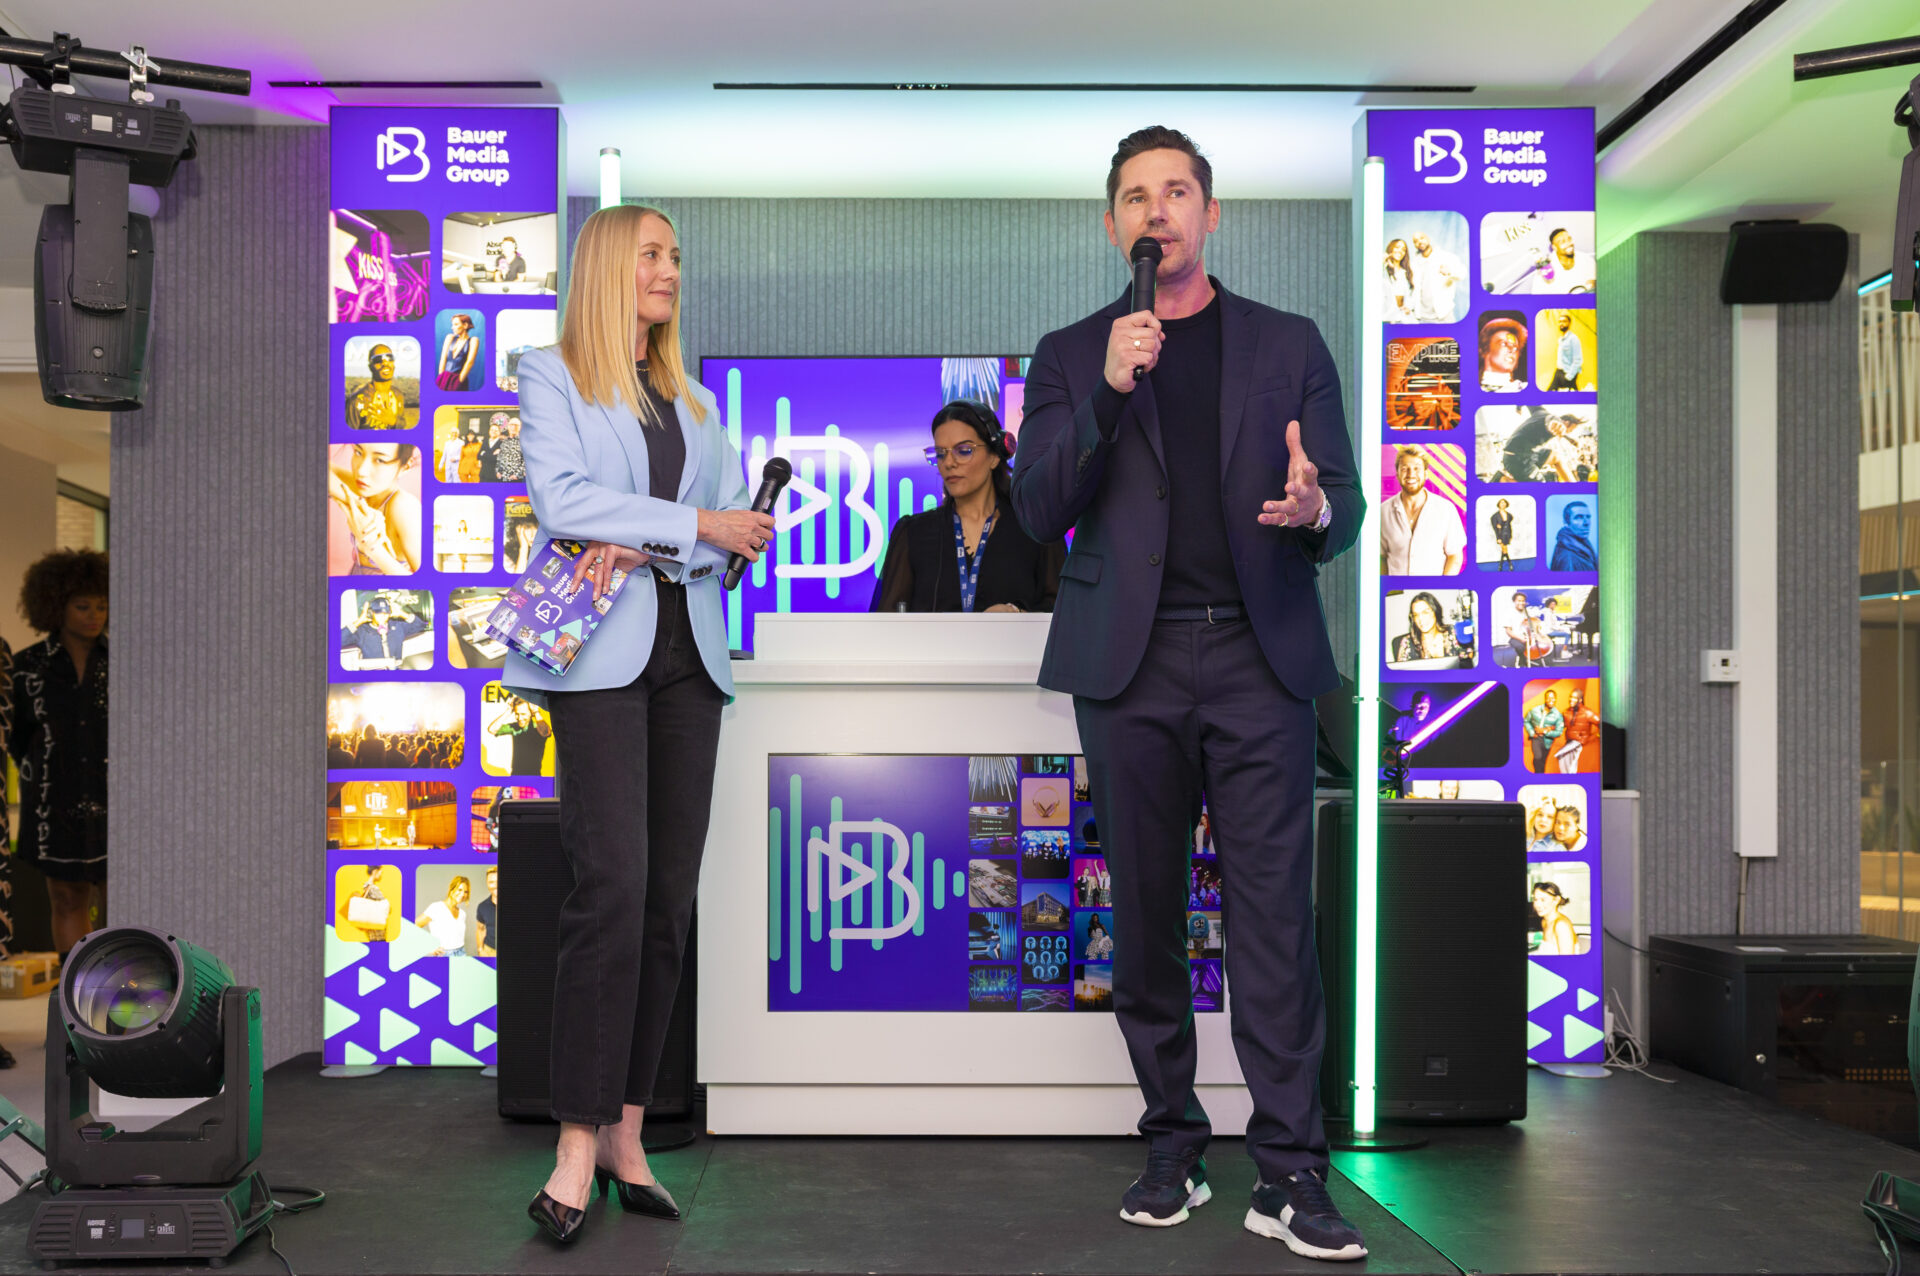 Bauer Media UK officially opens its new London HQ, The Lantern